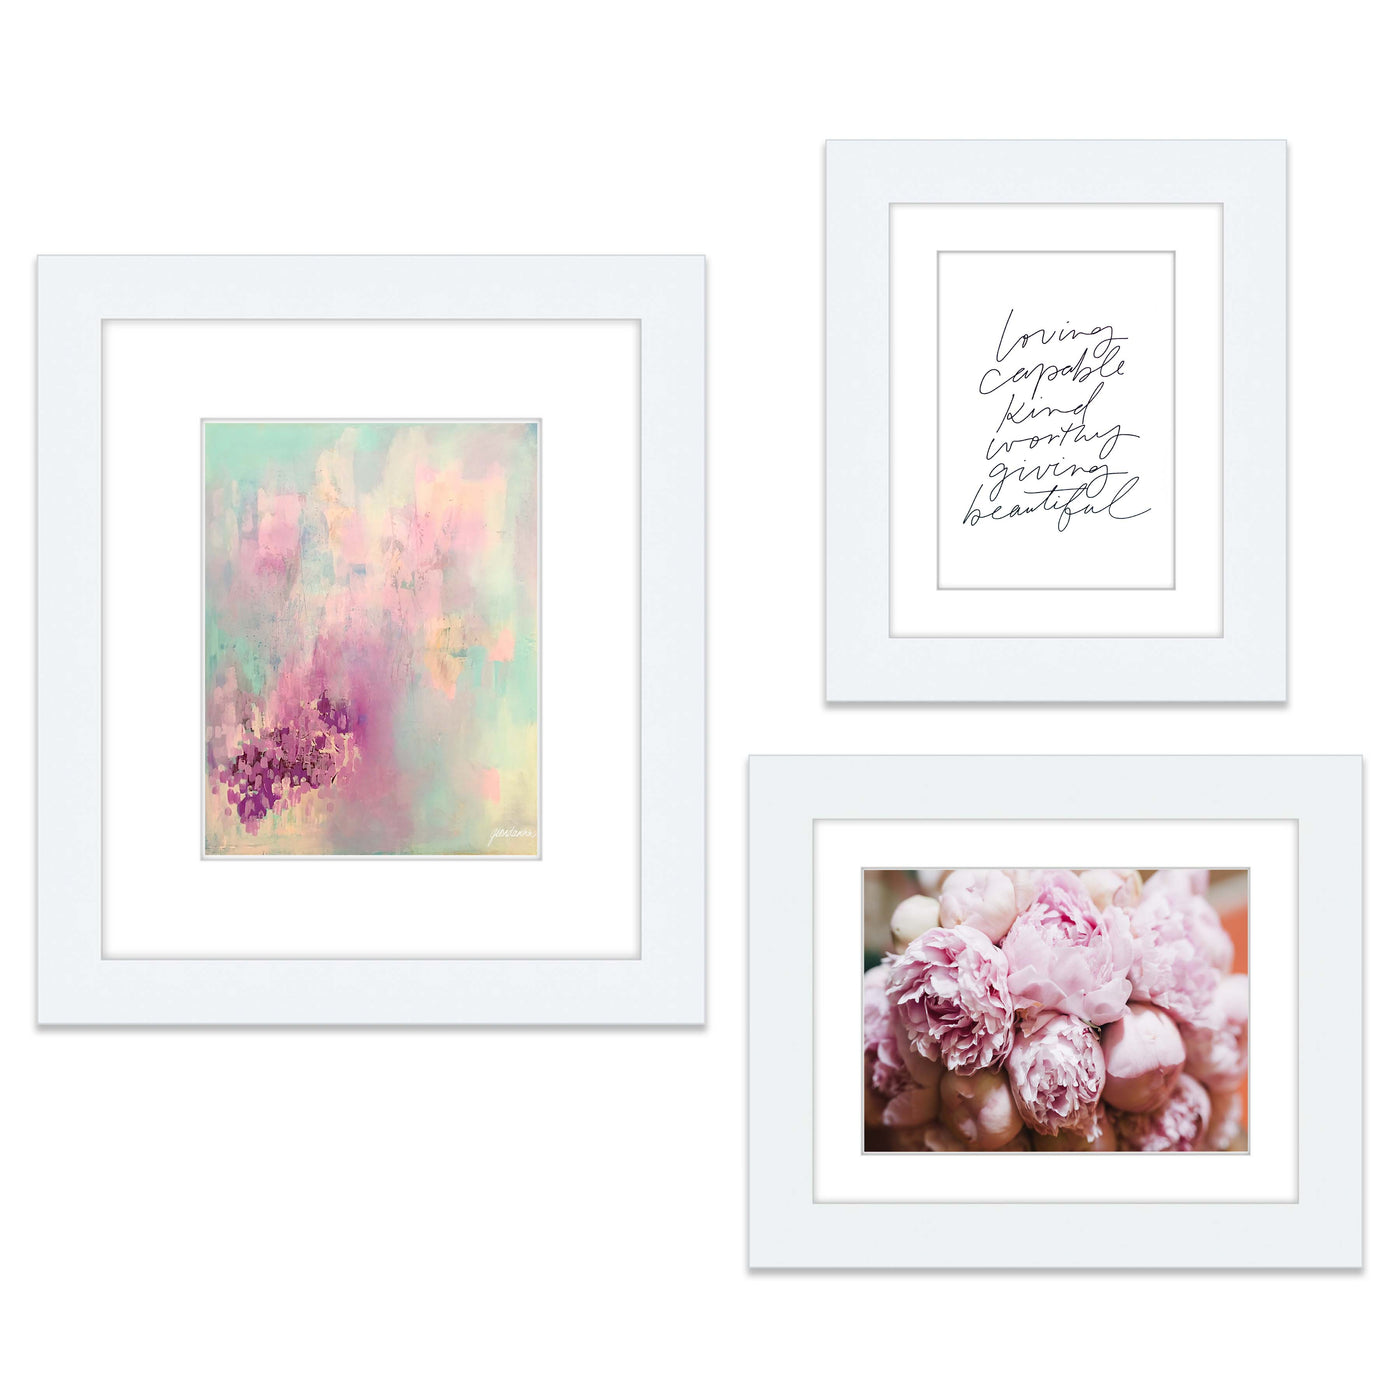 Gallery Walls Made Easy - Jensen - White Gallery Wall Frames